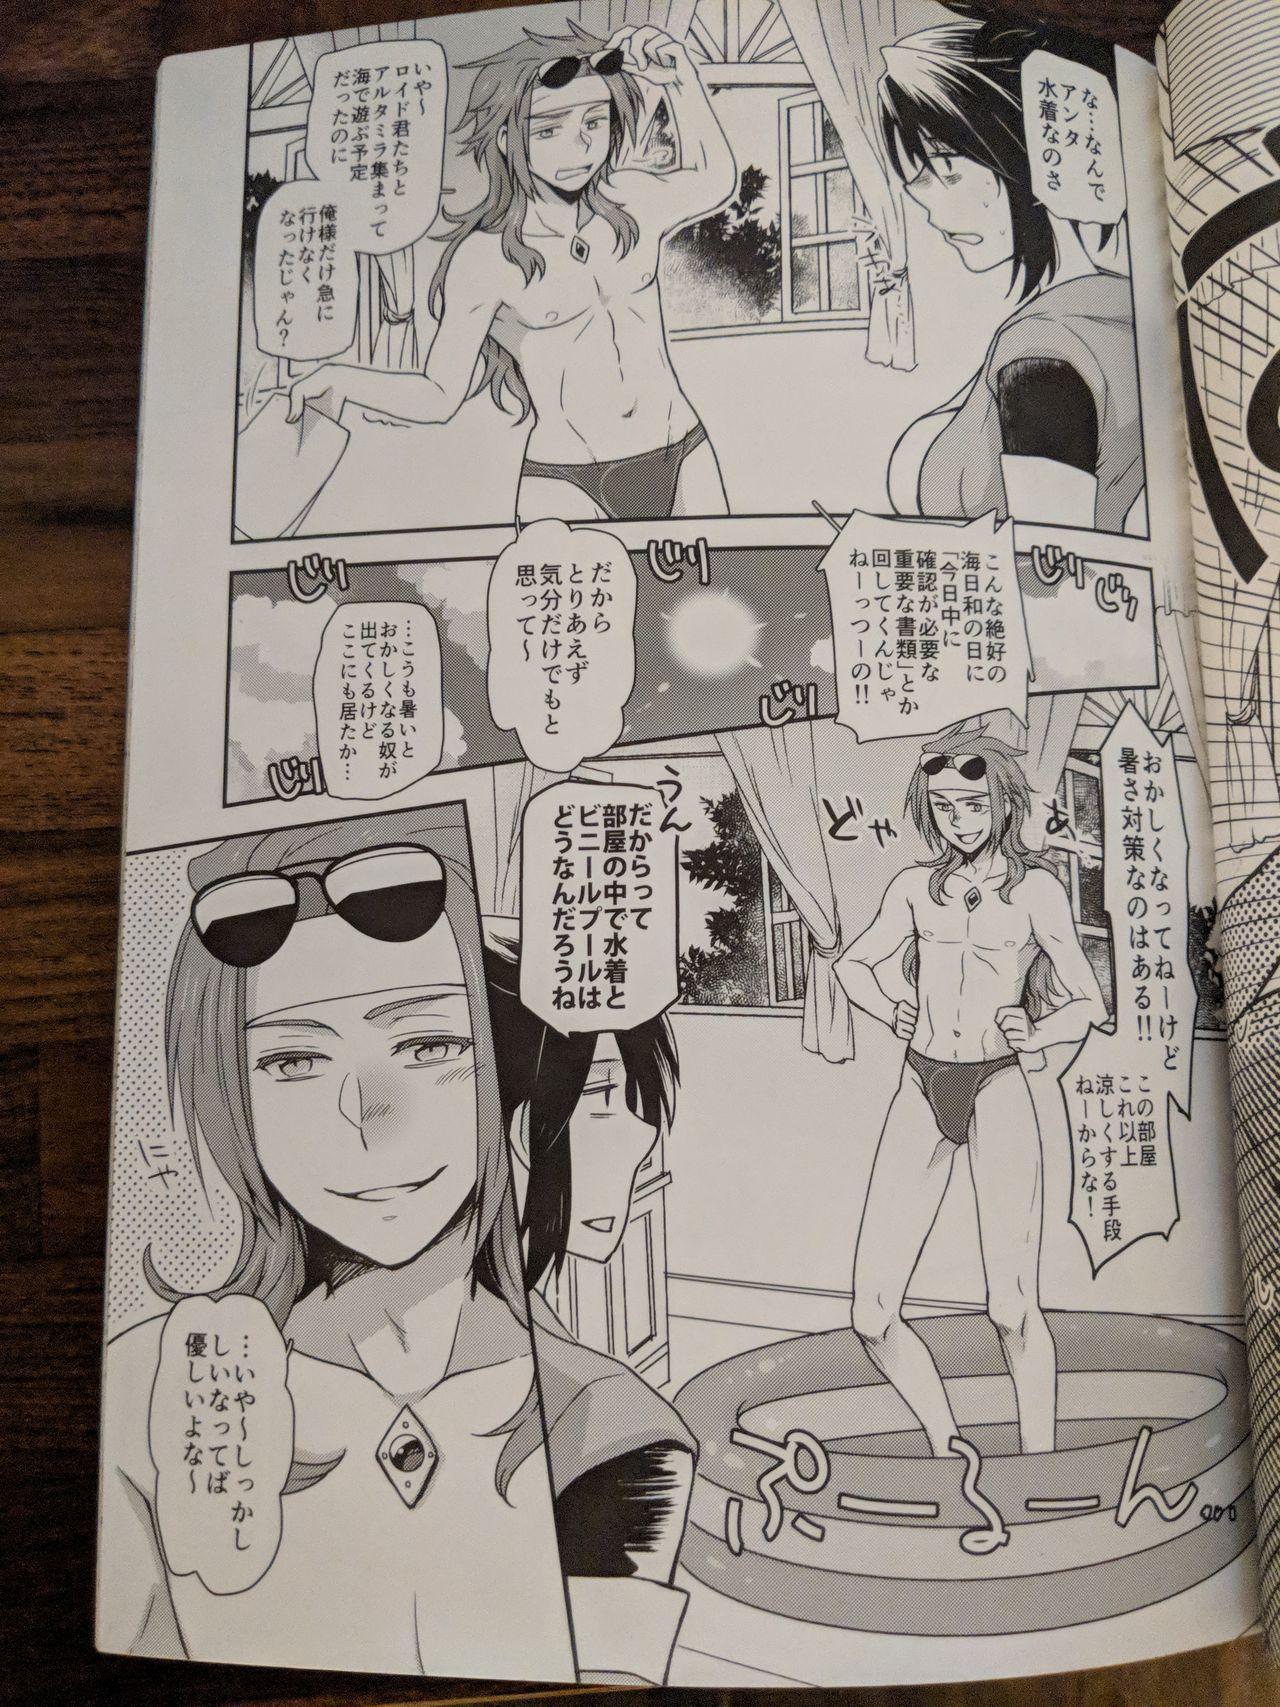 Load 彼女が水着にきがえたら - Tales of symphonia Behind - Page 4